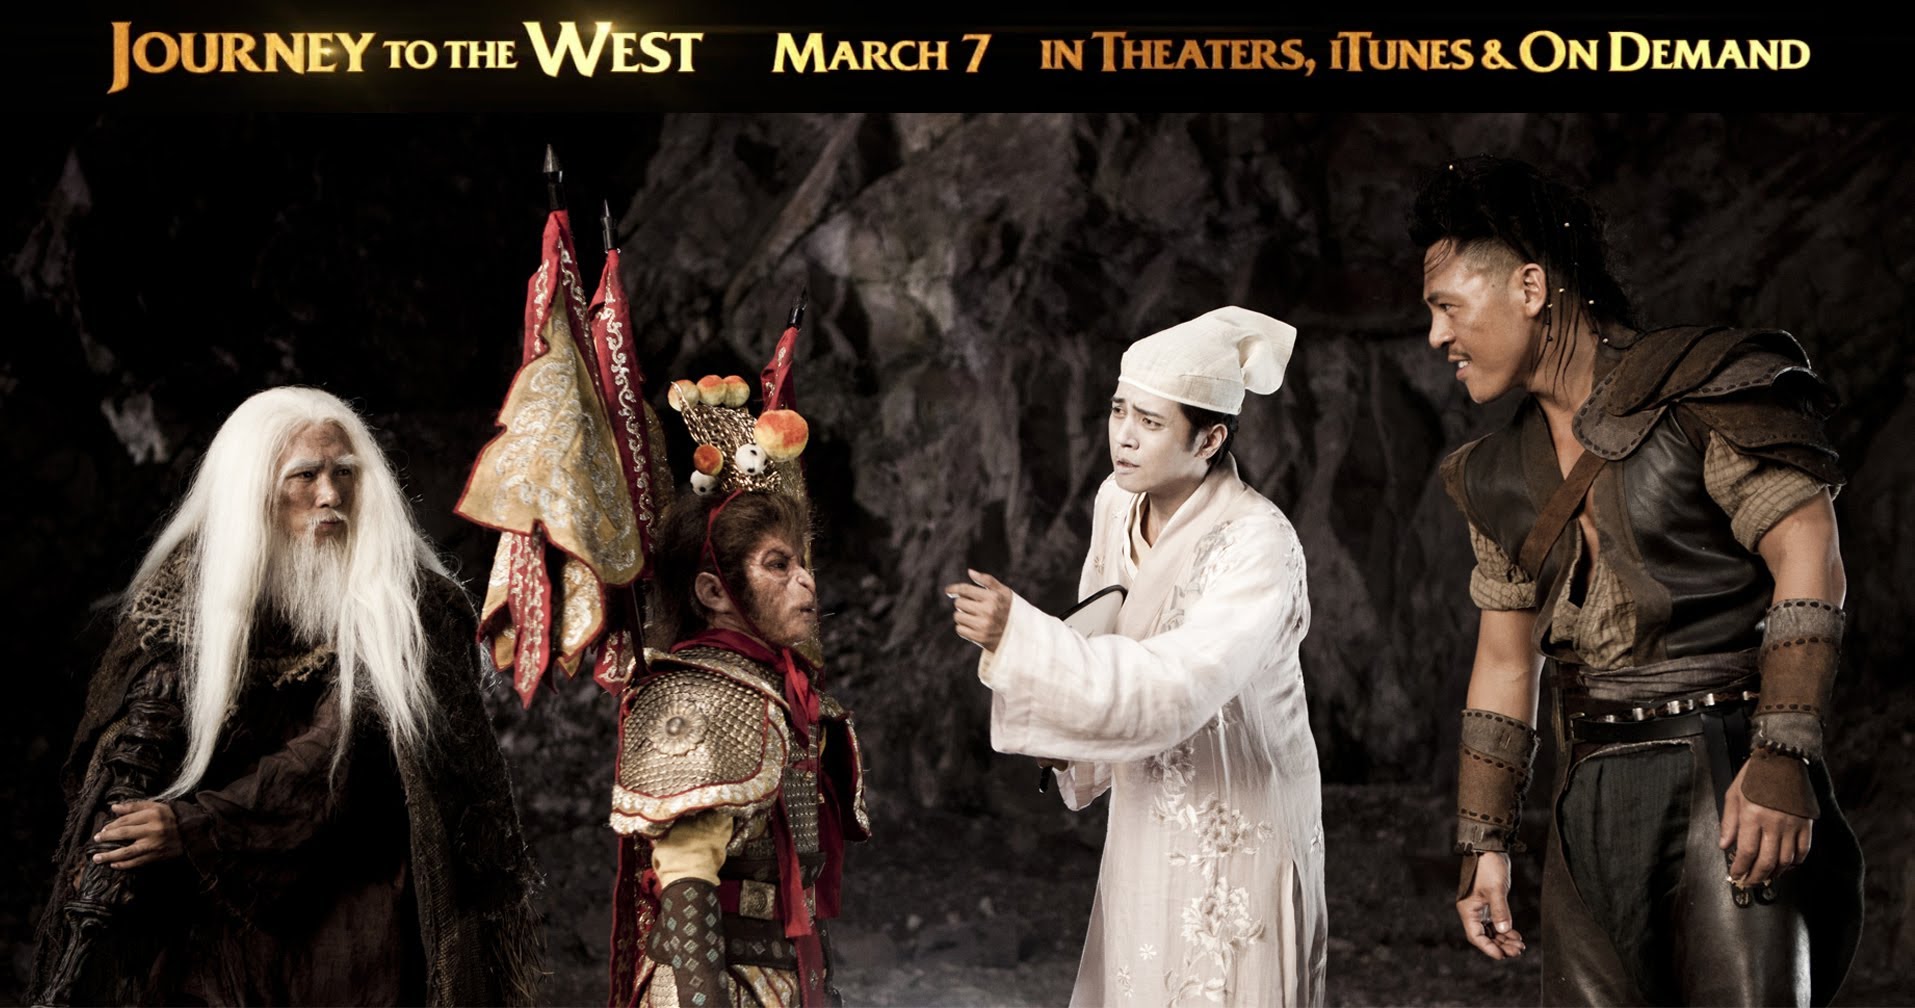 a journey to the west movie download